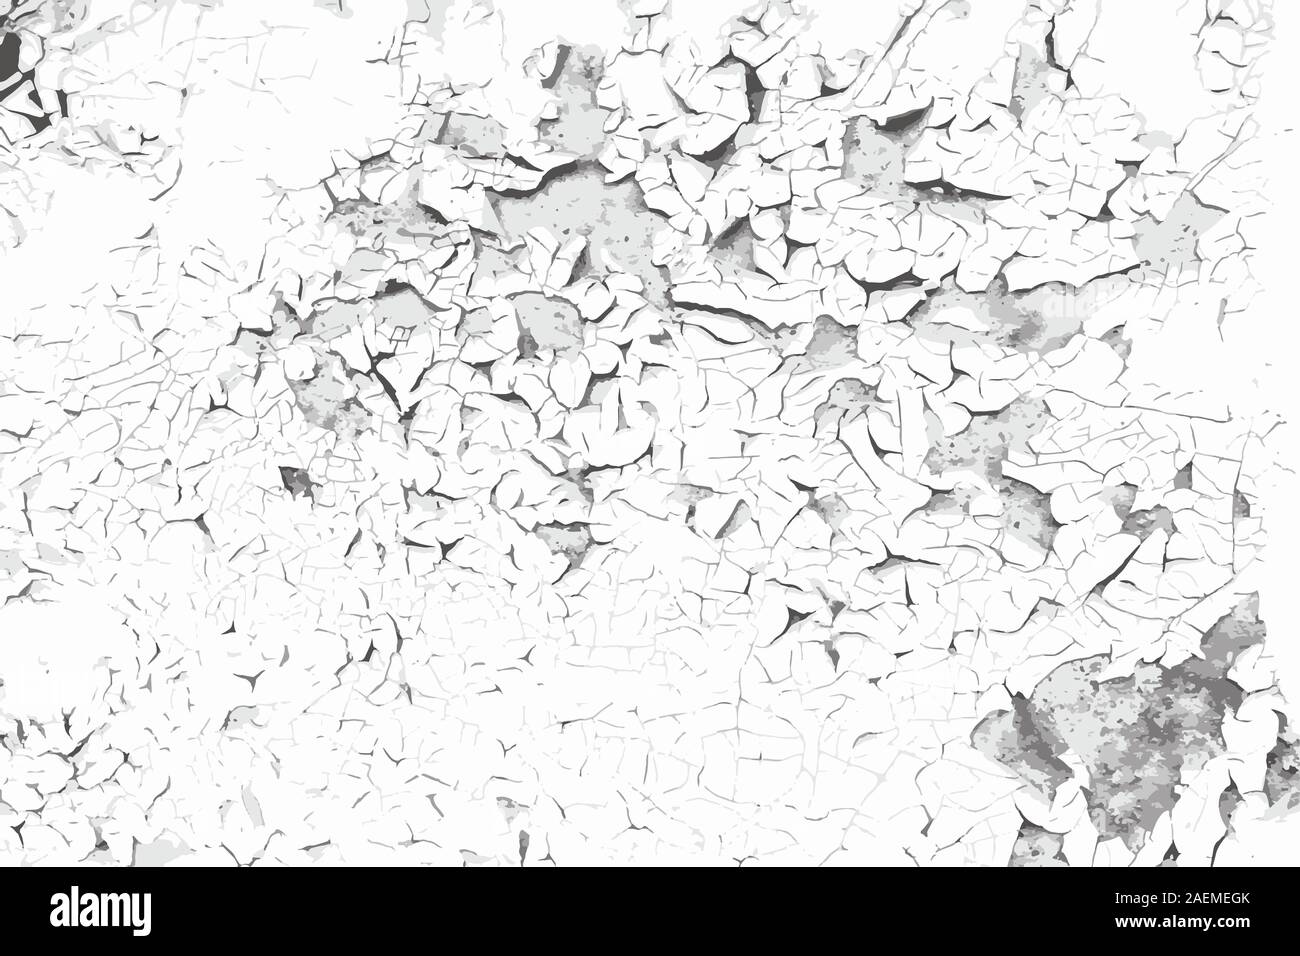 Old cracked paint background. Grunge vector black and white texture template for overlay artwork. Stock Vector